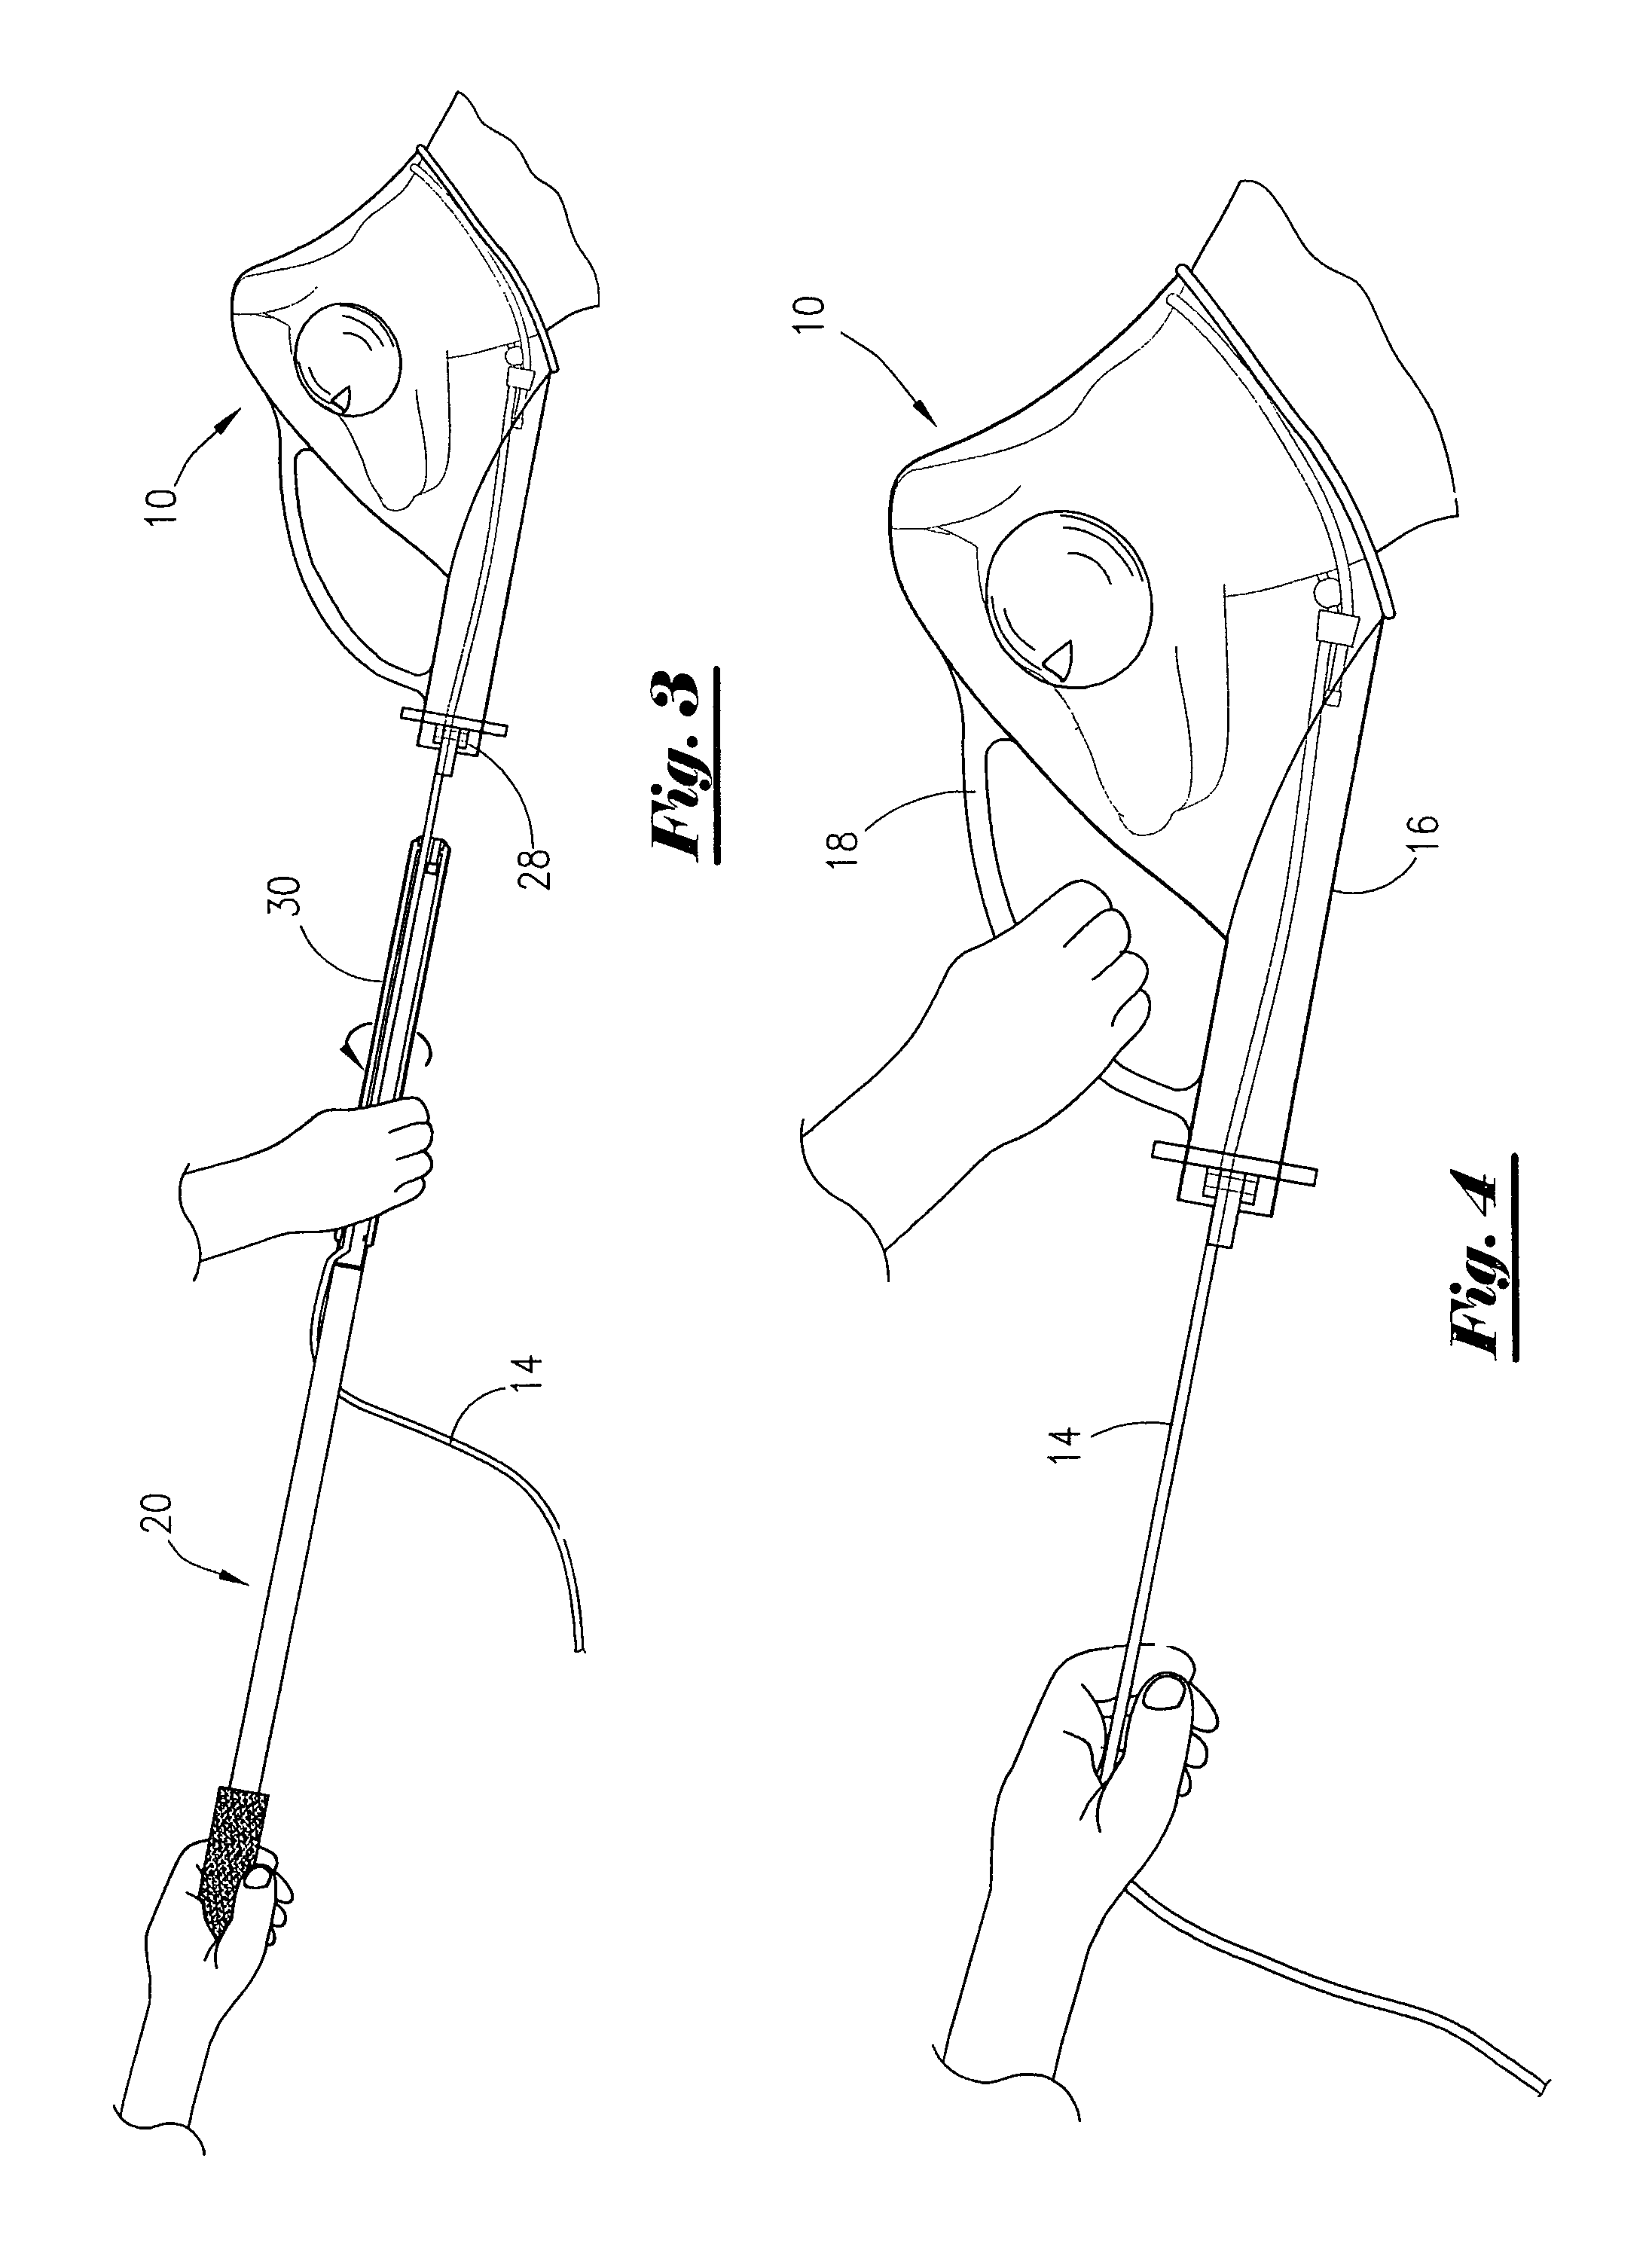 Method and apparatus for restraining and muzzling animals